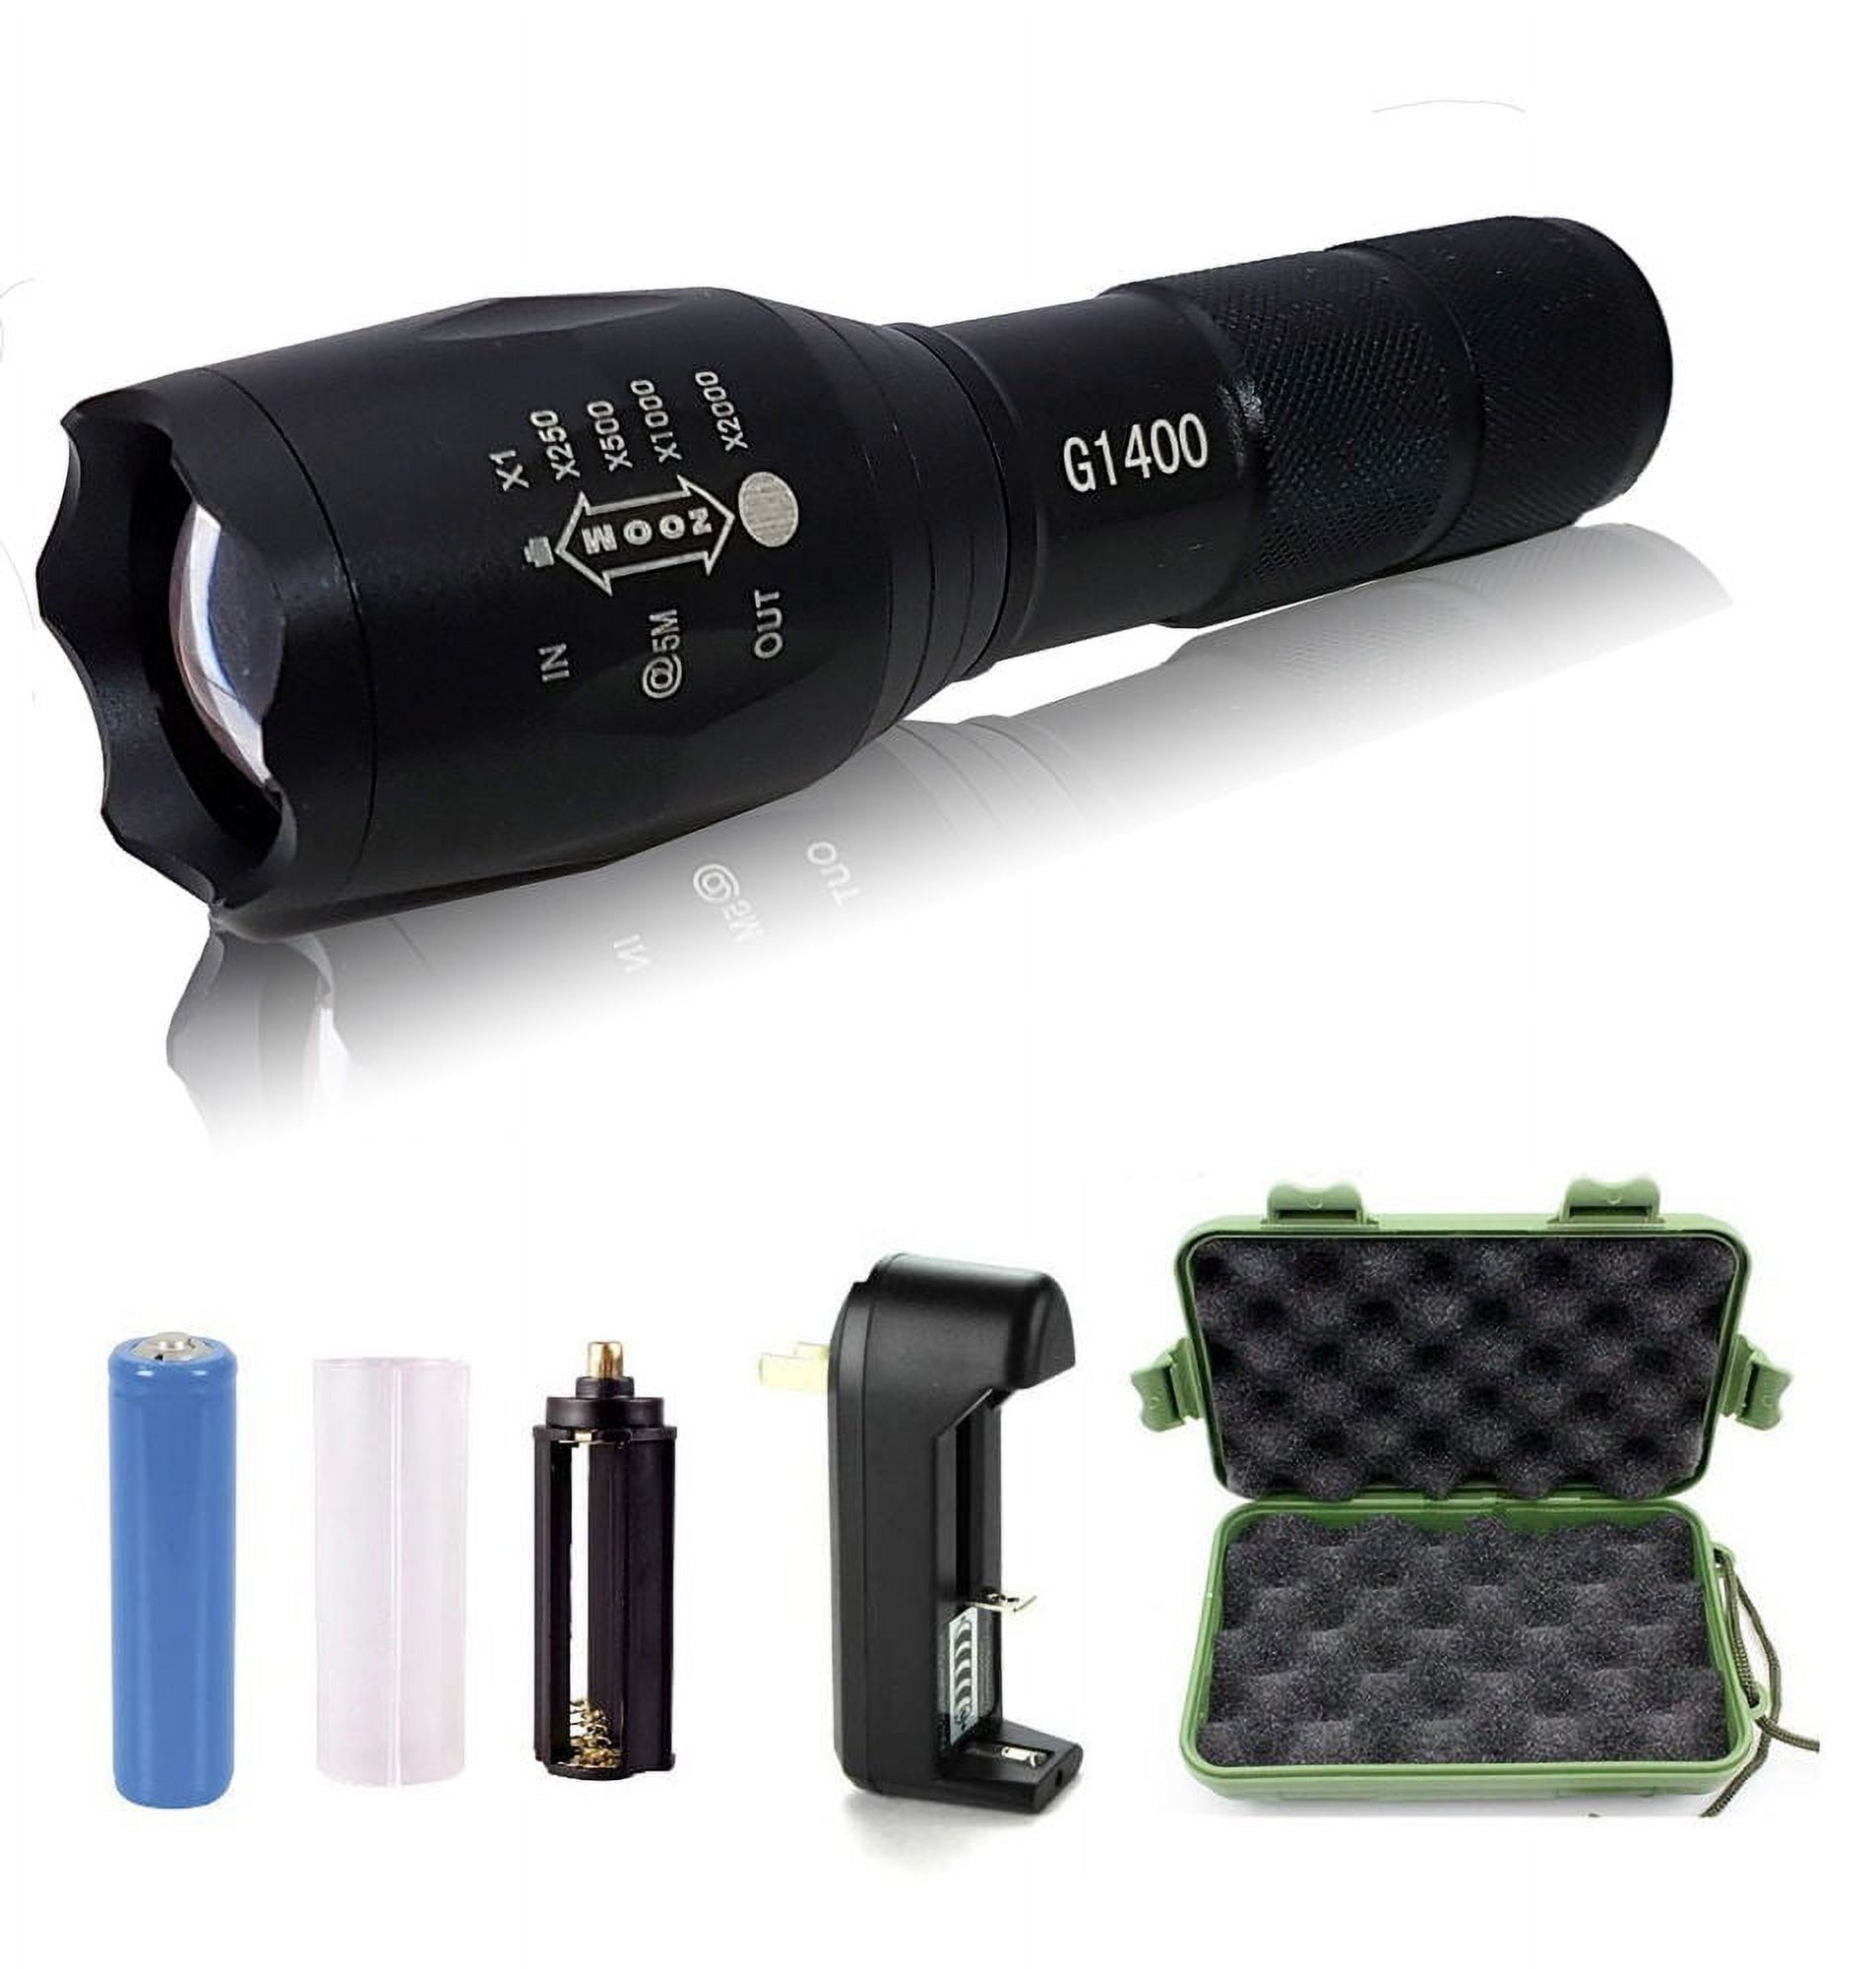 2pc G1400 Military Tactical Flashlight 5 Modes Zoomable Adjustable Focus - Ultra Bright LED Tactical Flashlight - Full Kit  (Black) - image 1 of 4